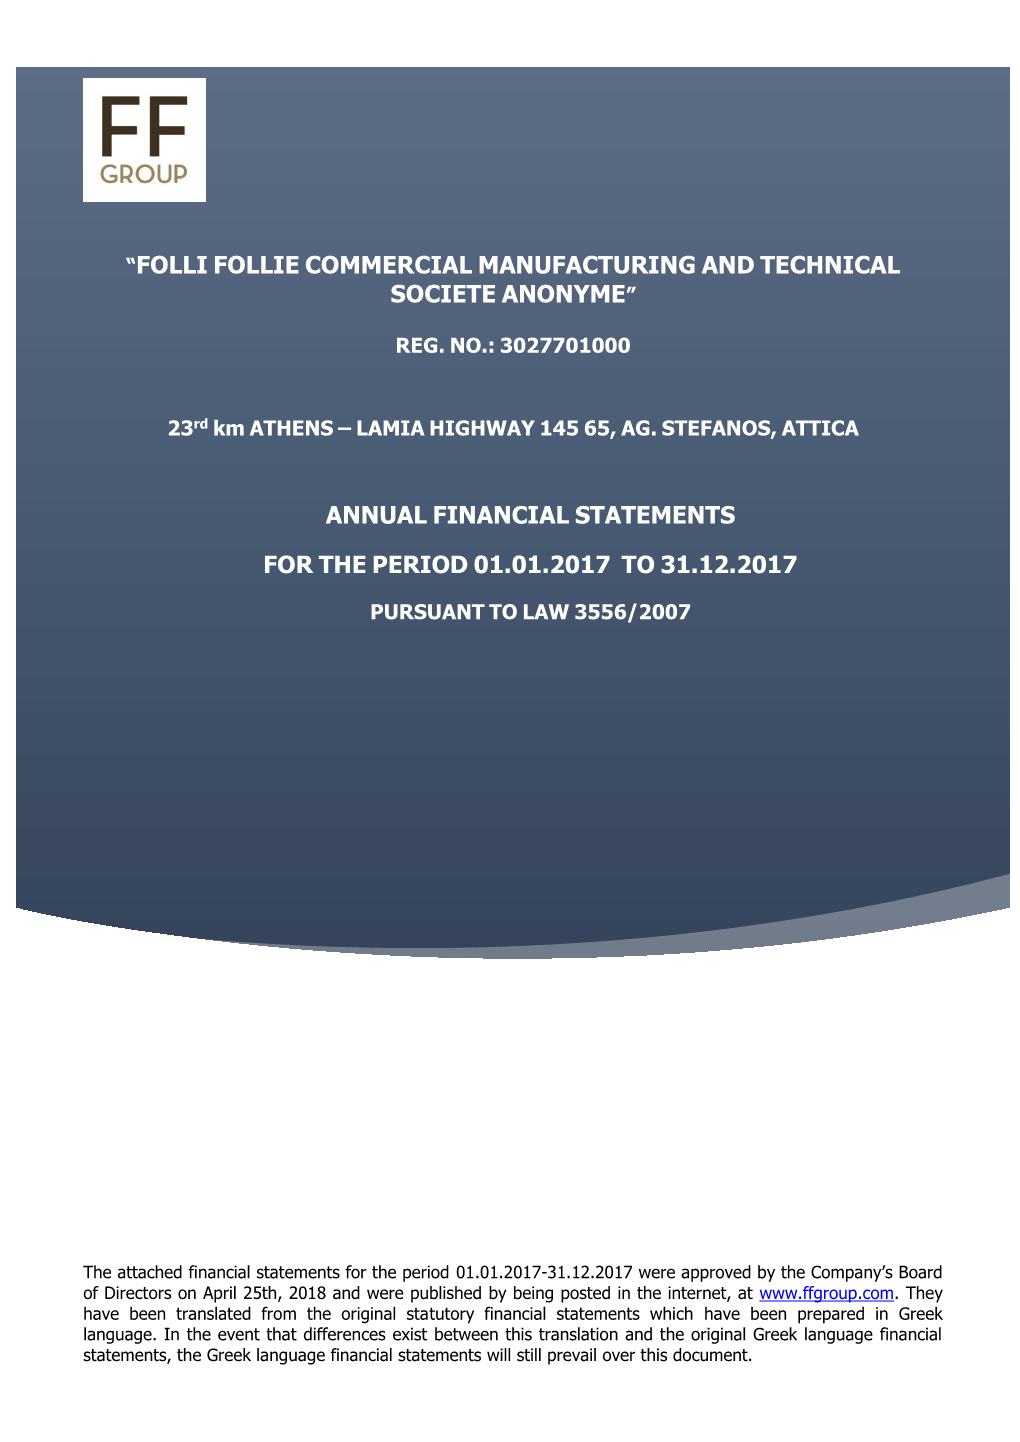 “Folli Follie Commercial Manufacturing and Technical Societe Anonyme”